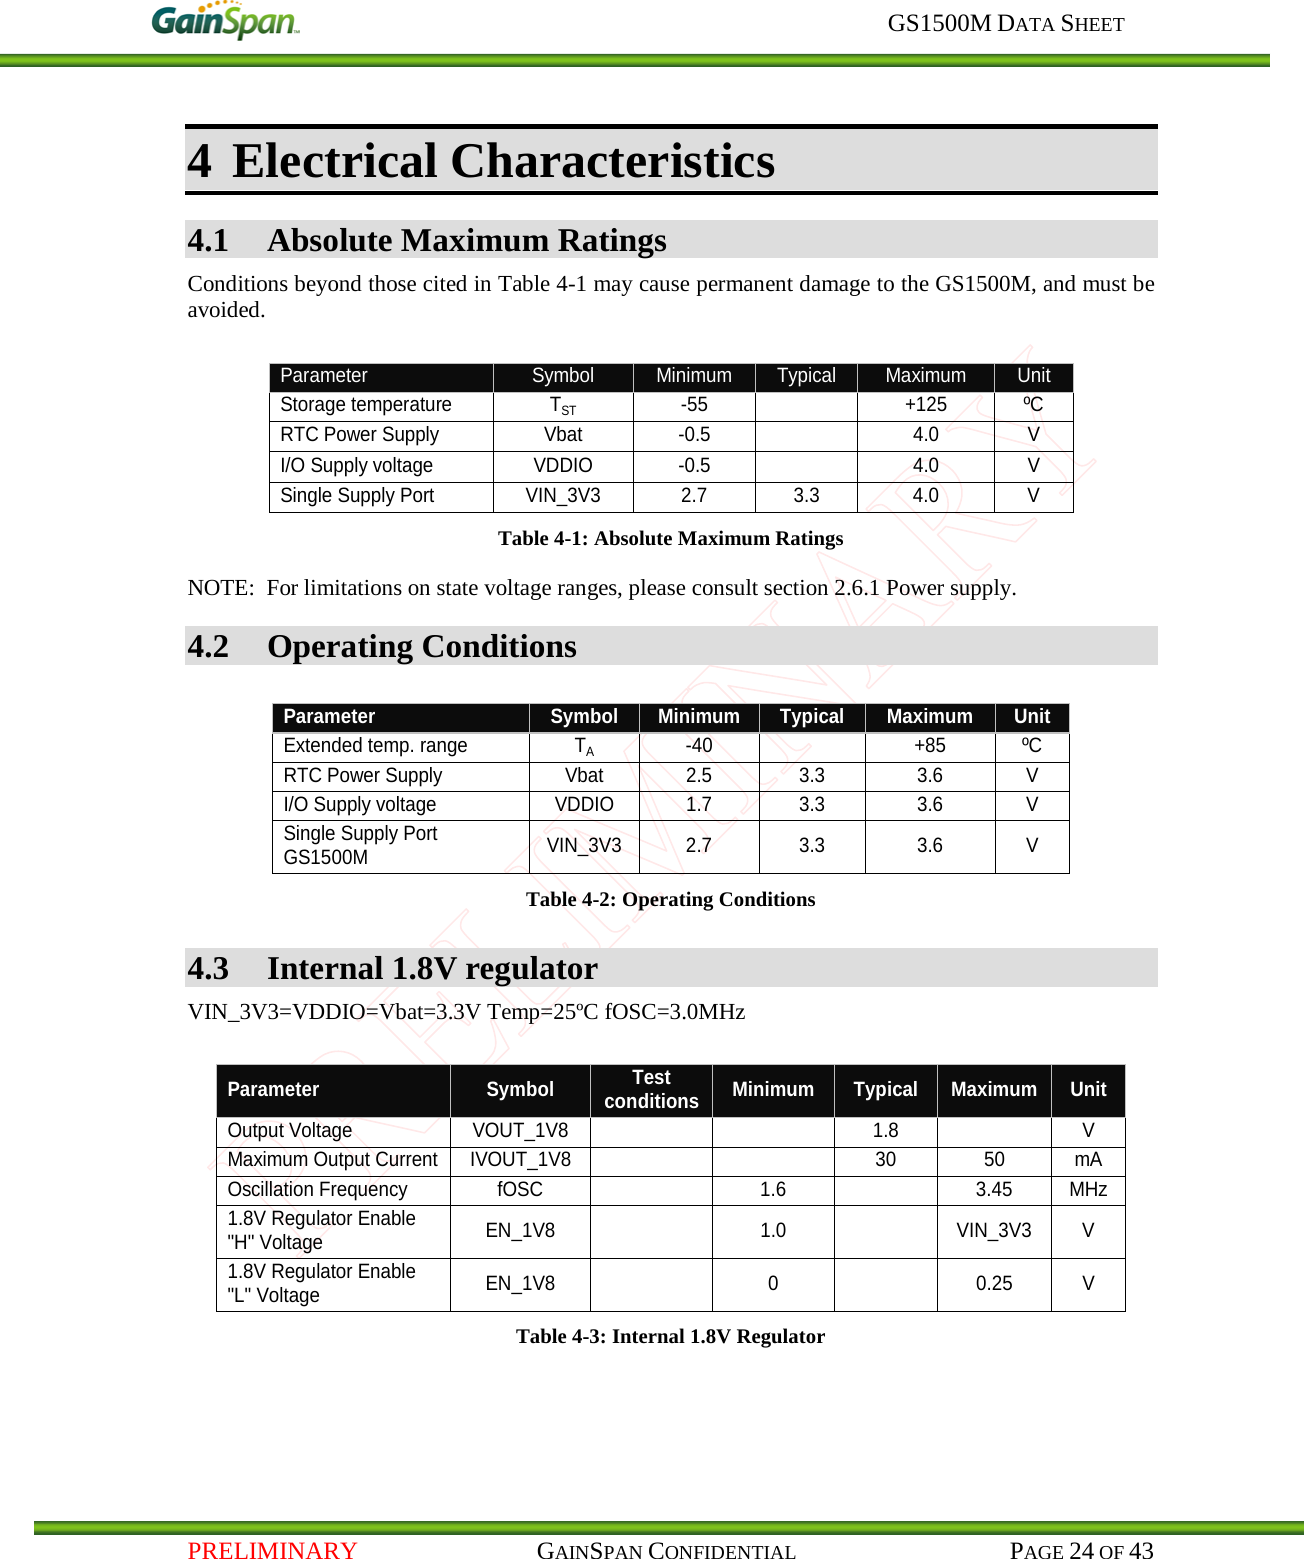     GS1500M DATA SHEET   PRELIMINARY                                    GAINSPAN CONFIDENTIAL                                           PAGE 24 OF 43 4 Electrical Characteristics 4.1 Absolute Maximum Ratings Conditions beyond those cited in Table 4-1 may cause permanent damage to the GS1500M, and must be avoided.    Parameter Symbol Minimum Typical Maximum Unit Storage temperature TST -55  +125 ºC RTC Power Supply Vbat -0.5  4.0 V I/O Supply voltage VDDIO -0.5  4.0 V Single Supply Port VIN_3V3 2.7 3.3 4.0  V Table 4-1: Absolute Maximum Ratings NOTE:  For limitations on state voltage ranges, please consult section 2.6.1 Power supply. 4.2 Operating Conditions  Parameter Symbol Minimum Typical Maximum Unit Extended temp. range TA -40  +85 ºC RTC Power Supply Vbat 2.5 3.3 3.6 V I/O Supply voltage VDDIO 1.7 3.3 3.6 V Single Supply Port GS1500M  VIN_3V3 2.7 3.3 3.6  V Table 4-2: Operating Conditions 4.3 Internal 1.8V regulator VIN_3V3=VDDIO=Vbat=3.3V Temp=25ºC fOSC=3.0MHz  Parameter Symbol Test conditions Minimum Typical Maximum Unit Output Voltage VOUT_1V8   1.8  V Maximum Output Current IVOUT_1V8   30 50 mA Oscillation Frequency fOSC    1.6    3.45 MHz 1.8V Regulator Enable &quot;H&quot; Voltage EN_1V8  1.0    VIN_3V3  V 1.8V Regulator Enable &quot;L&quot; Voltage EN_1V8  0    0.25  V Table 4-3: Internal 1.8V Regulator   